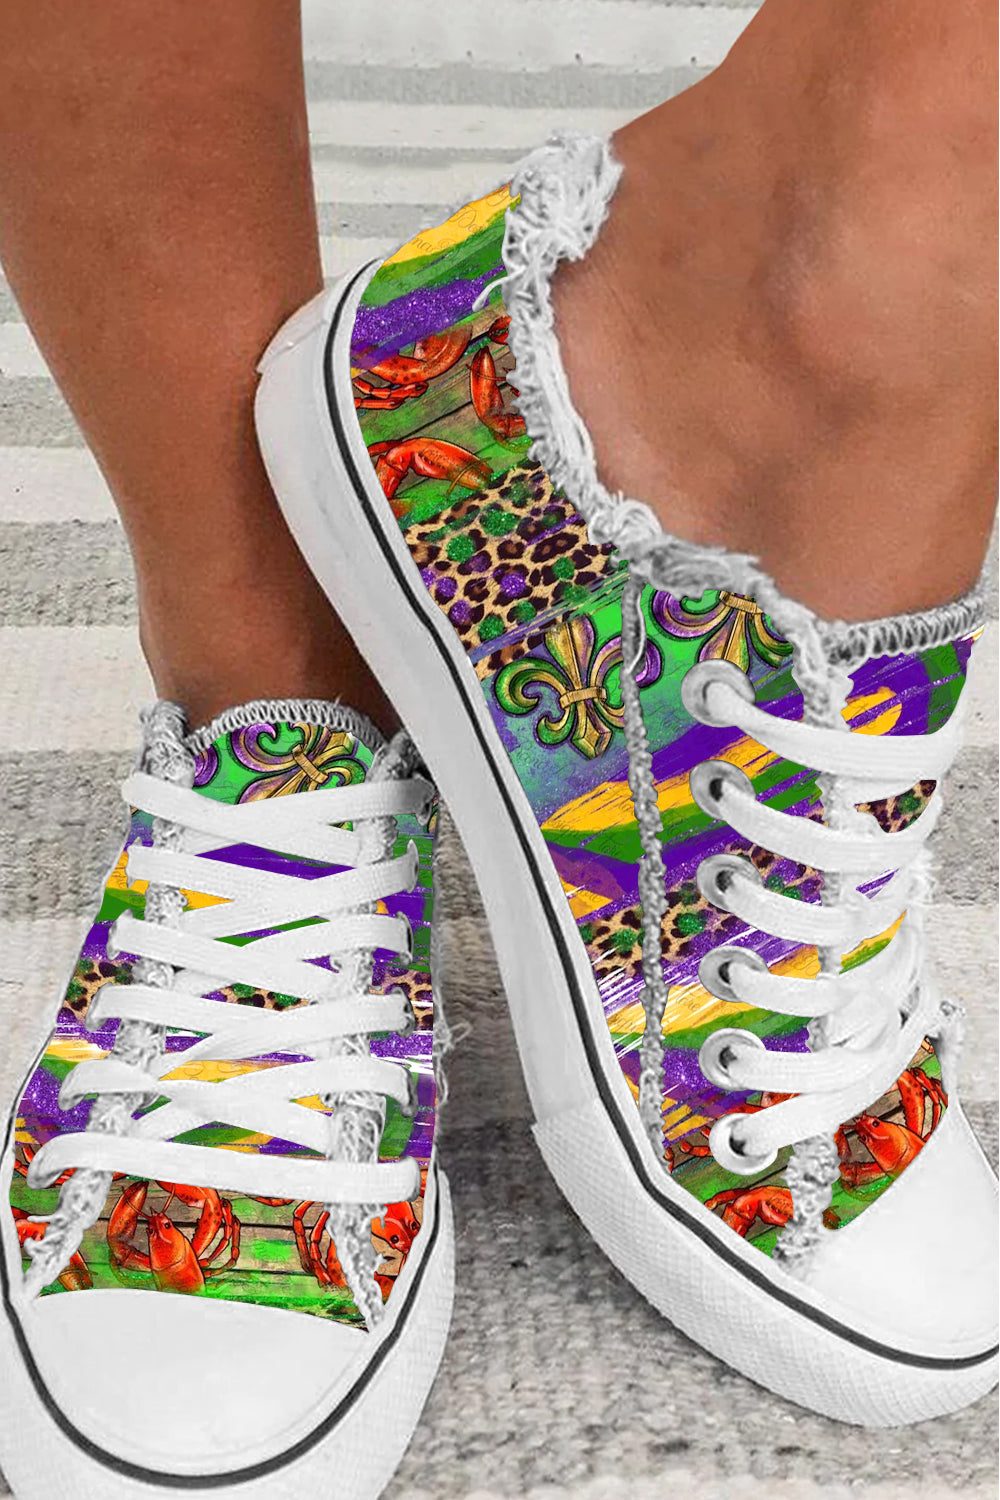 Mardi Gras Truck With Mask Fleur De Lis And Crawfish Western Leopard Print Canvas Shoes Sneakers